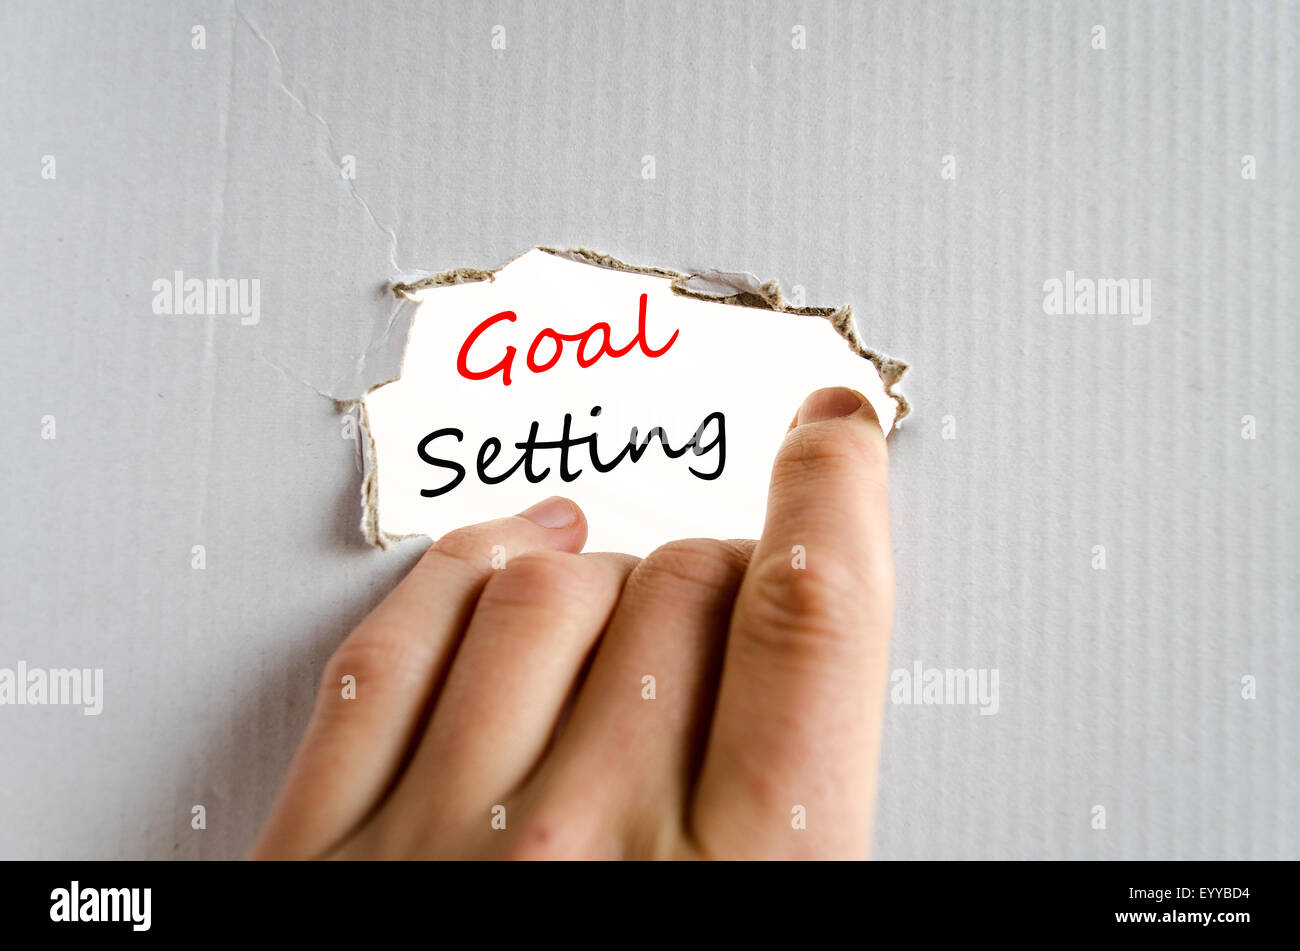 Goal setting text concept isolated over white background Stock Photo